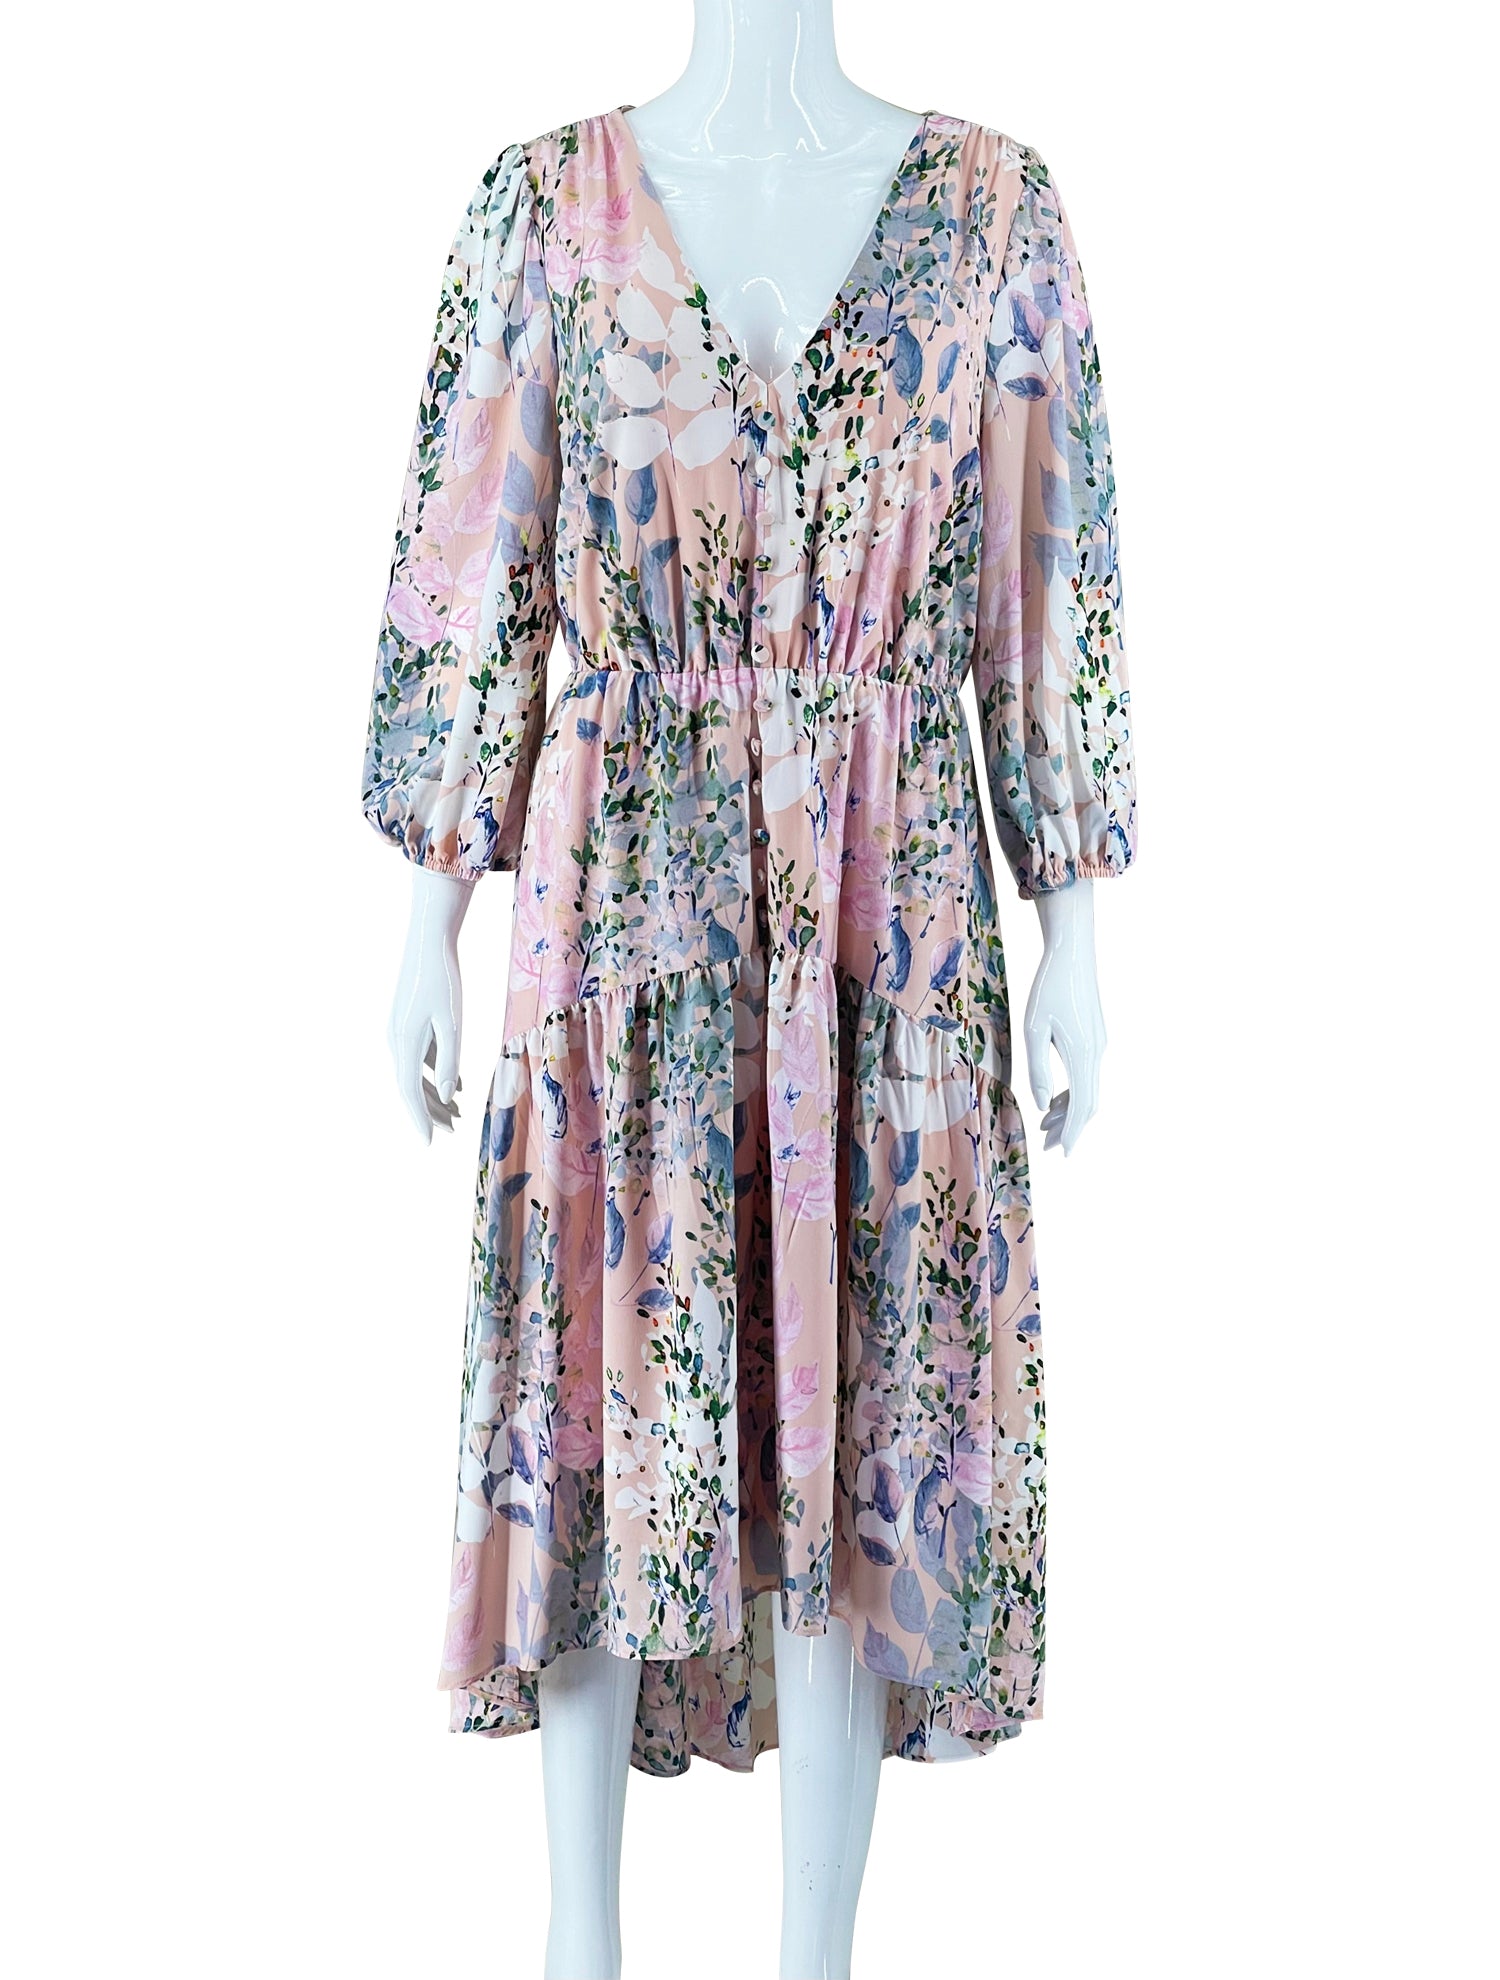 Adrianna Papell Floral High-Low Maxi Dress